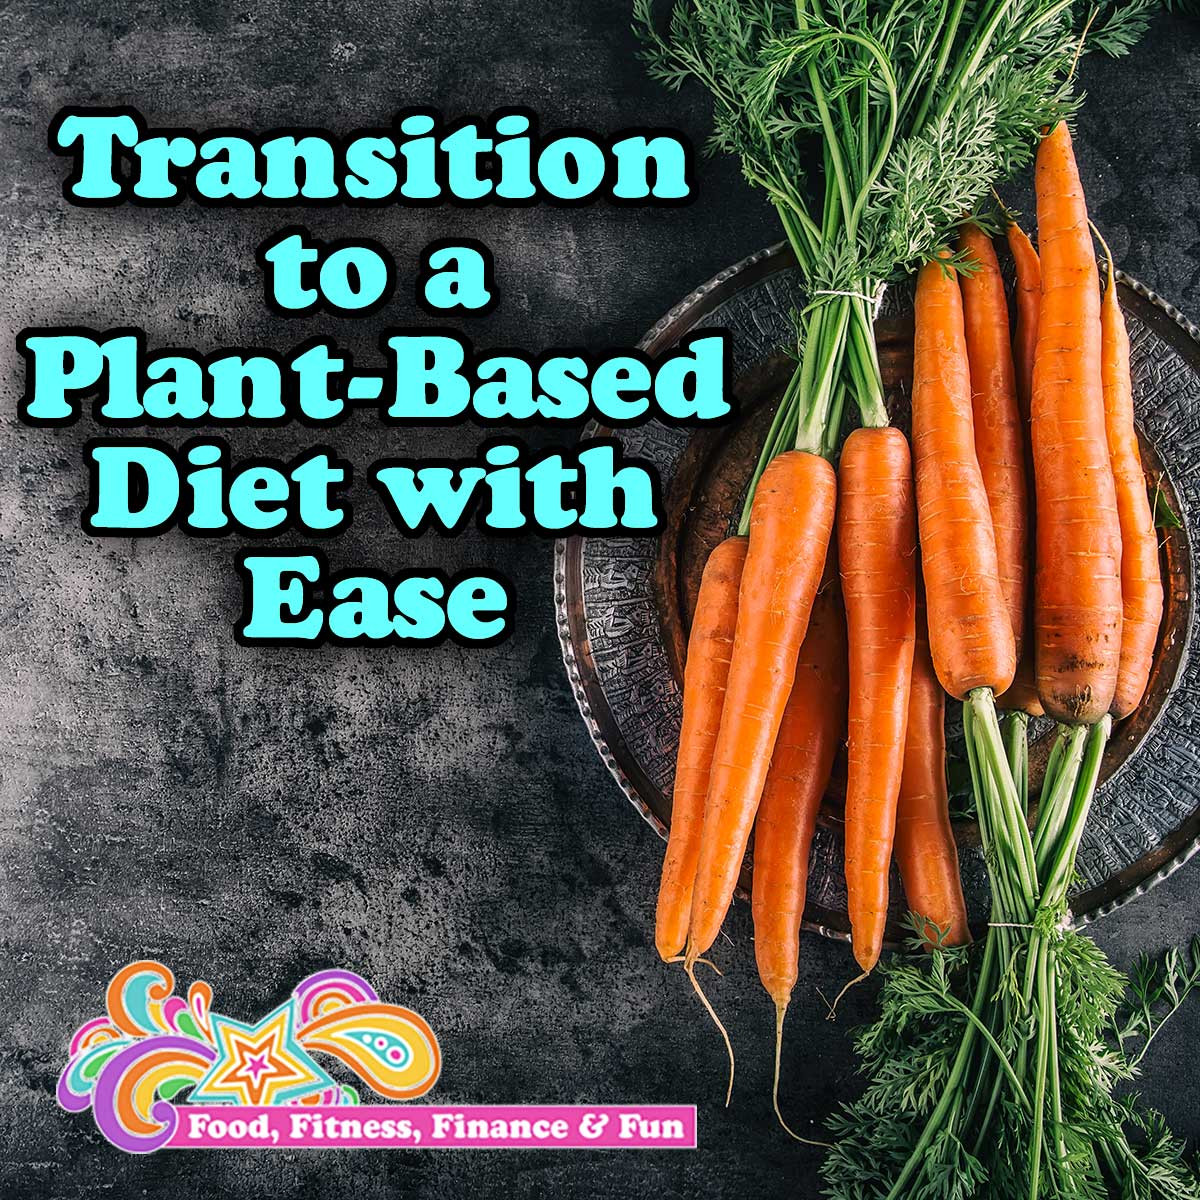 How To Transition To Plant Based Diet
 Transition to a Plant Based Diet with Ease